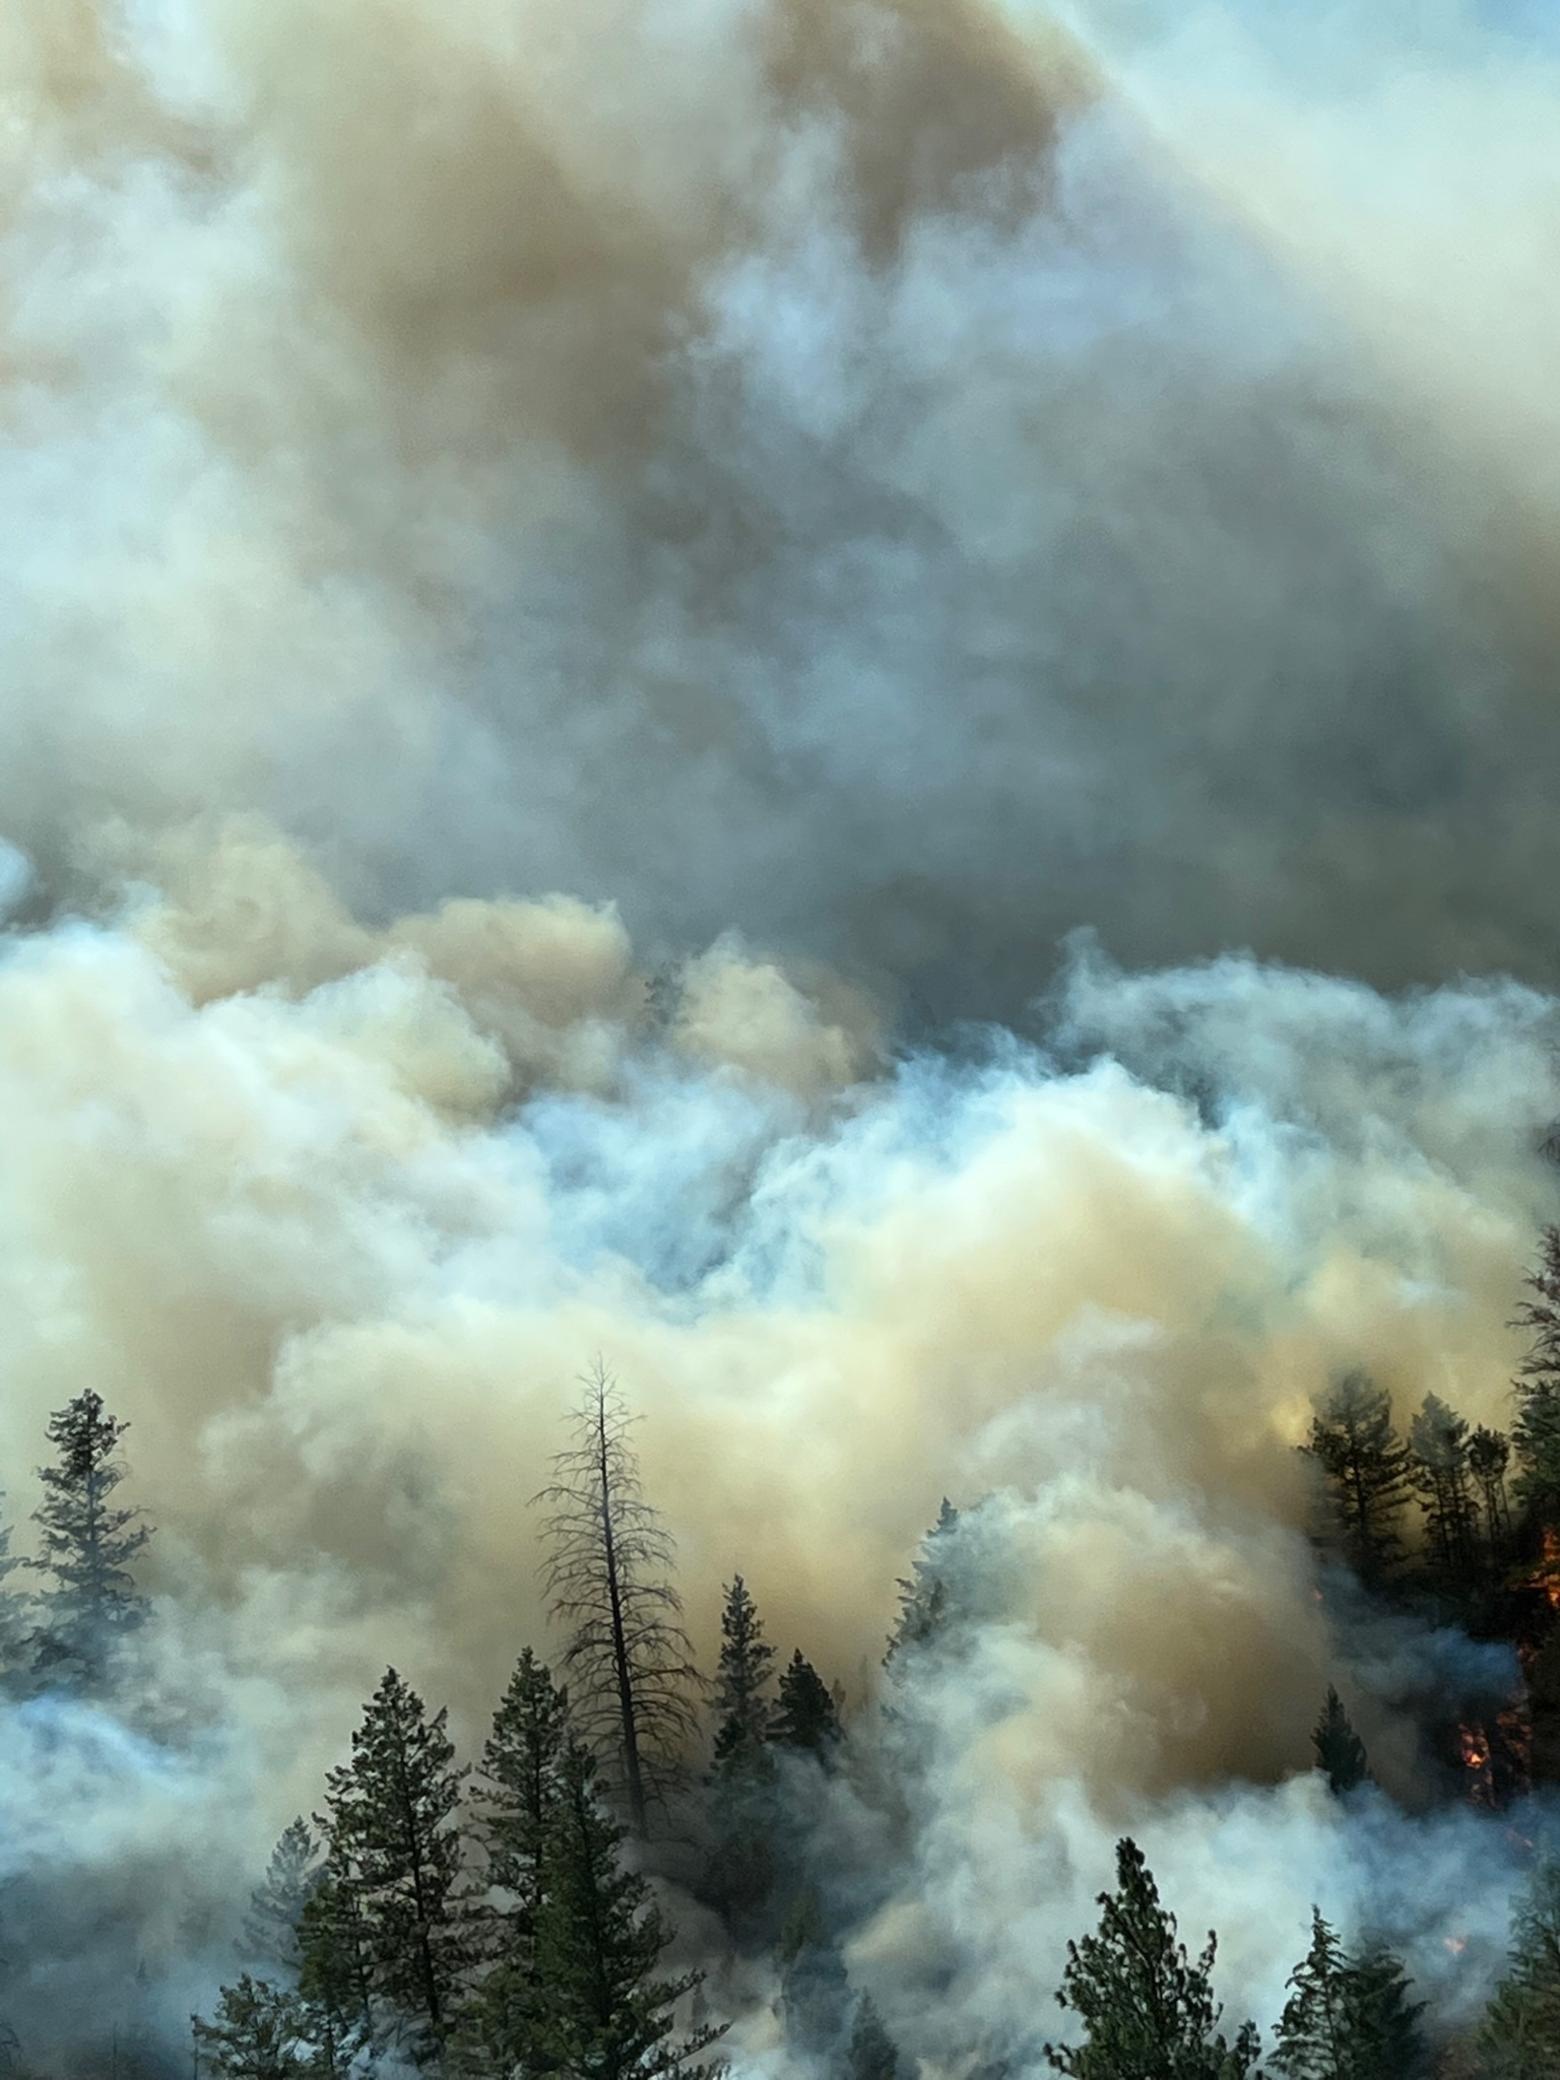 Wildfires are inherent to the American West. A warming planet along with a century of human fire suppression have contributed to bigger, hotter and more frequent wildfires but expanded growth into the wildland-urban interface is increasing the risk factors exponentially. Photo by Audrey Cadwallader